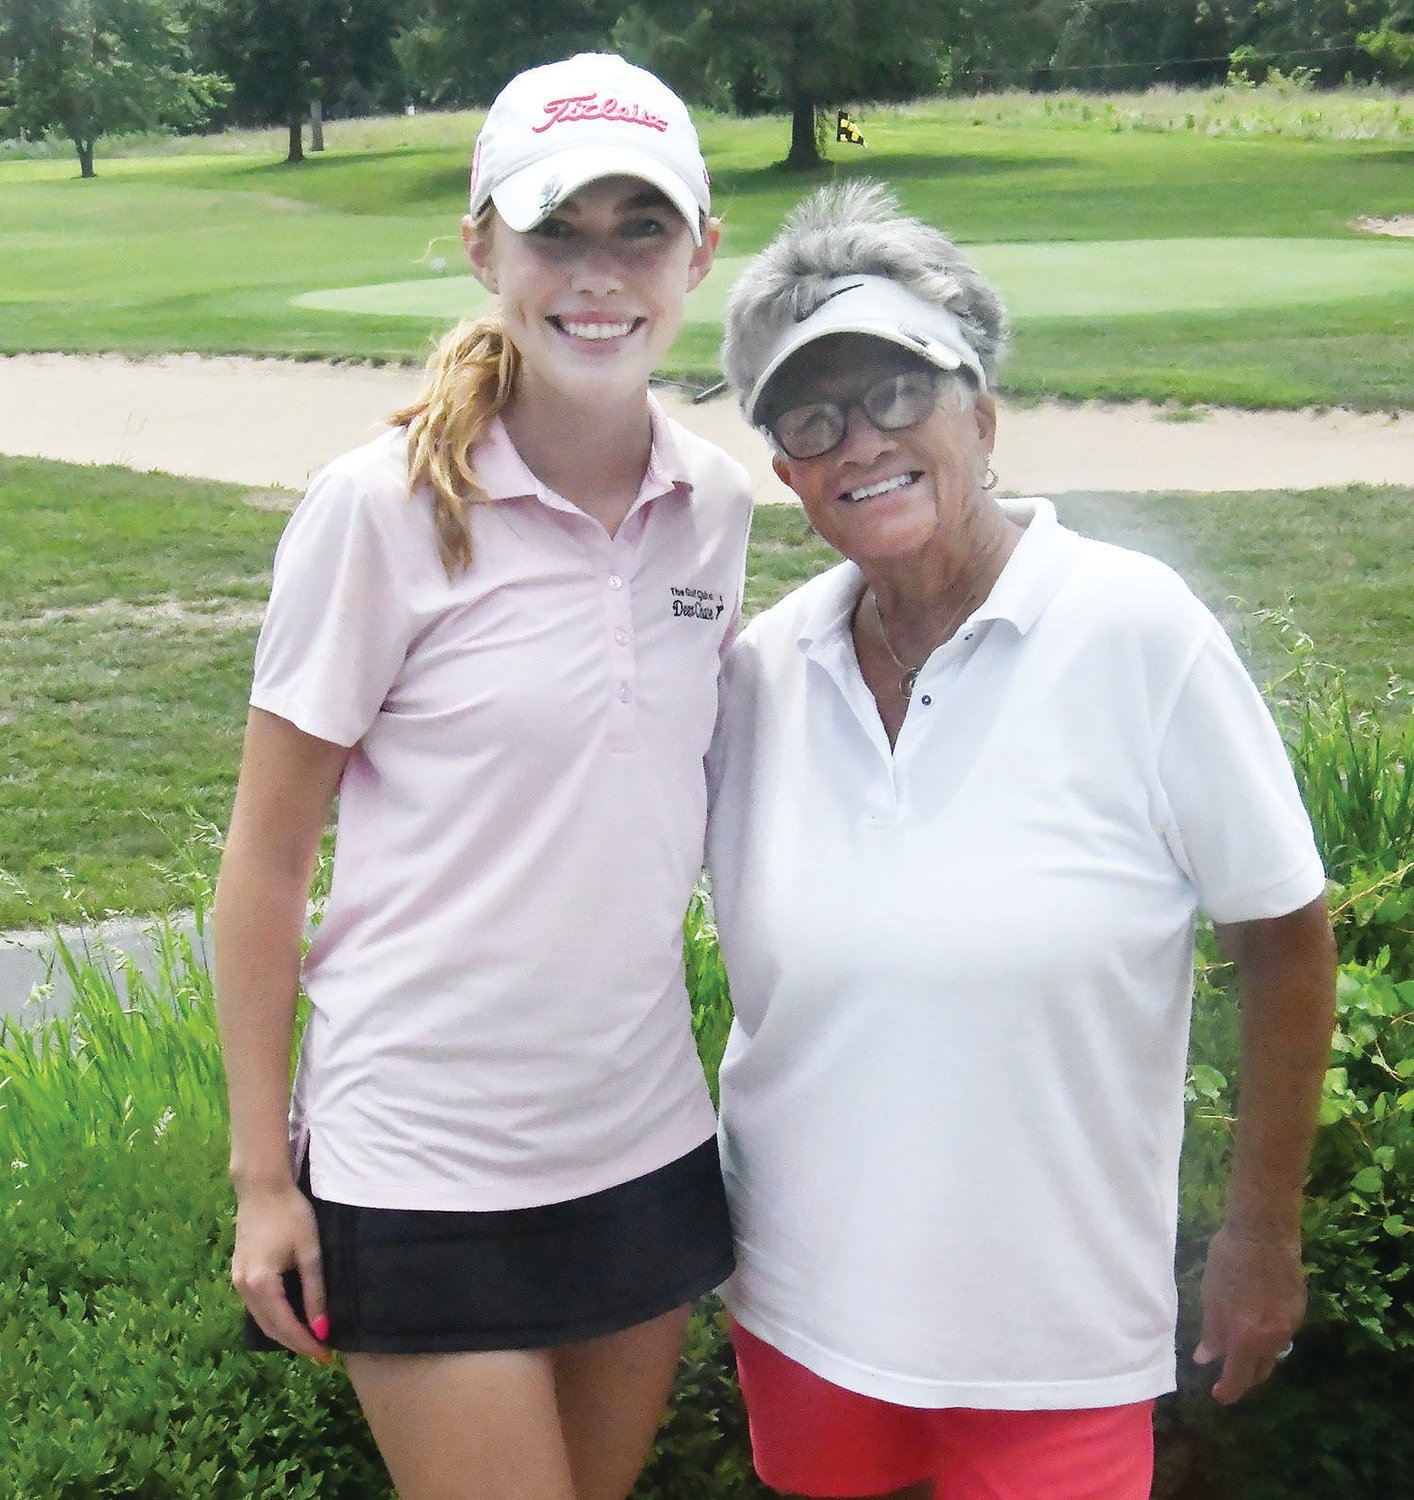 Sydney Willingham (left) and Chris Sells earned the Ladies Scramble championship on Saturday. The pair combined for an 18-hole round of 67, three strokes better than the rest of the field. The event featured three flights and plenty of door prizes in addition to cash payouts.